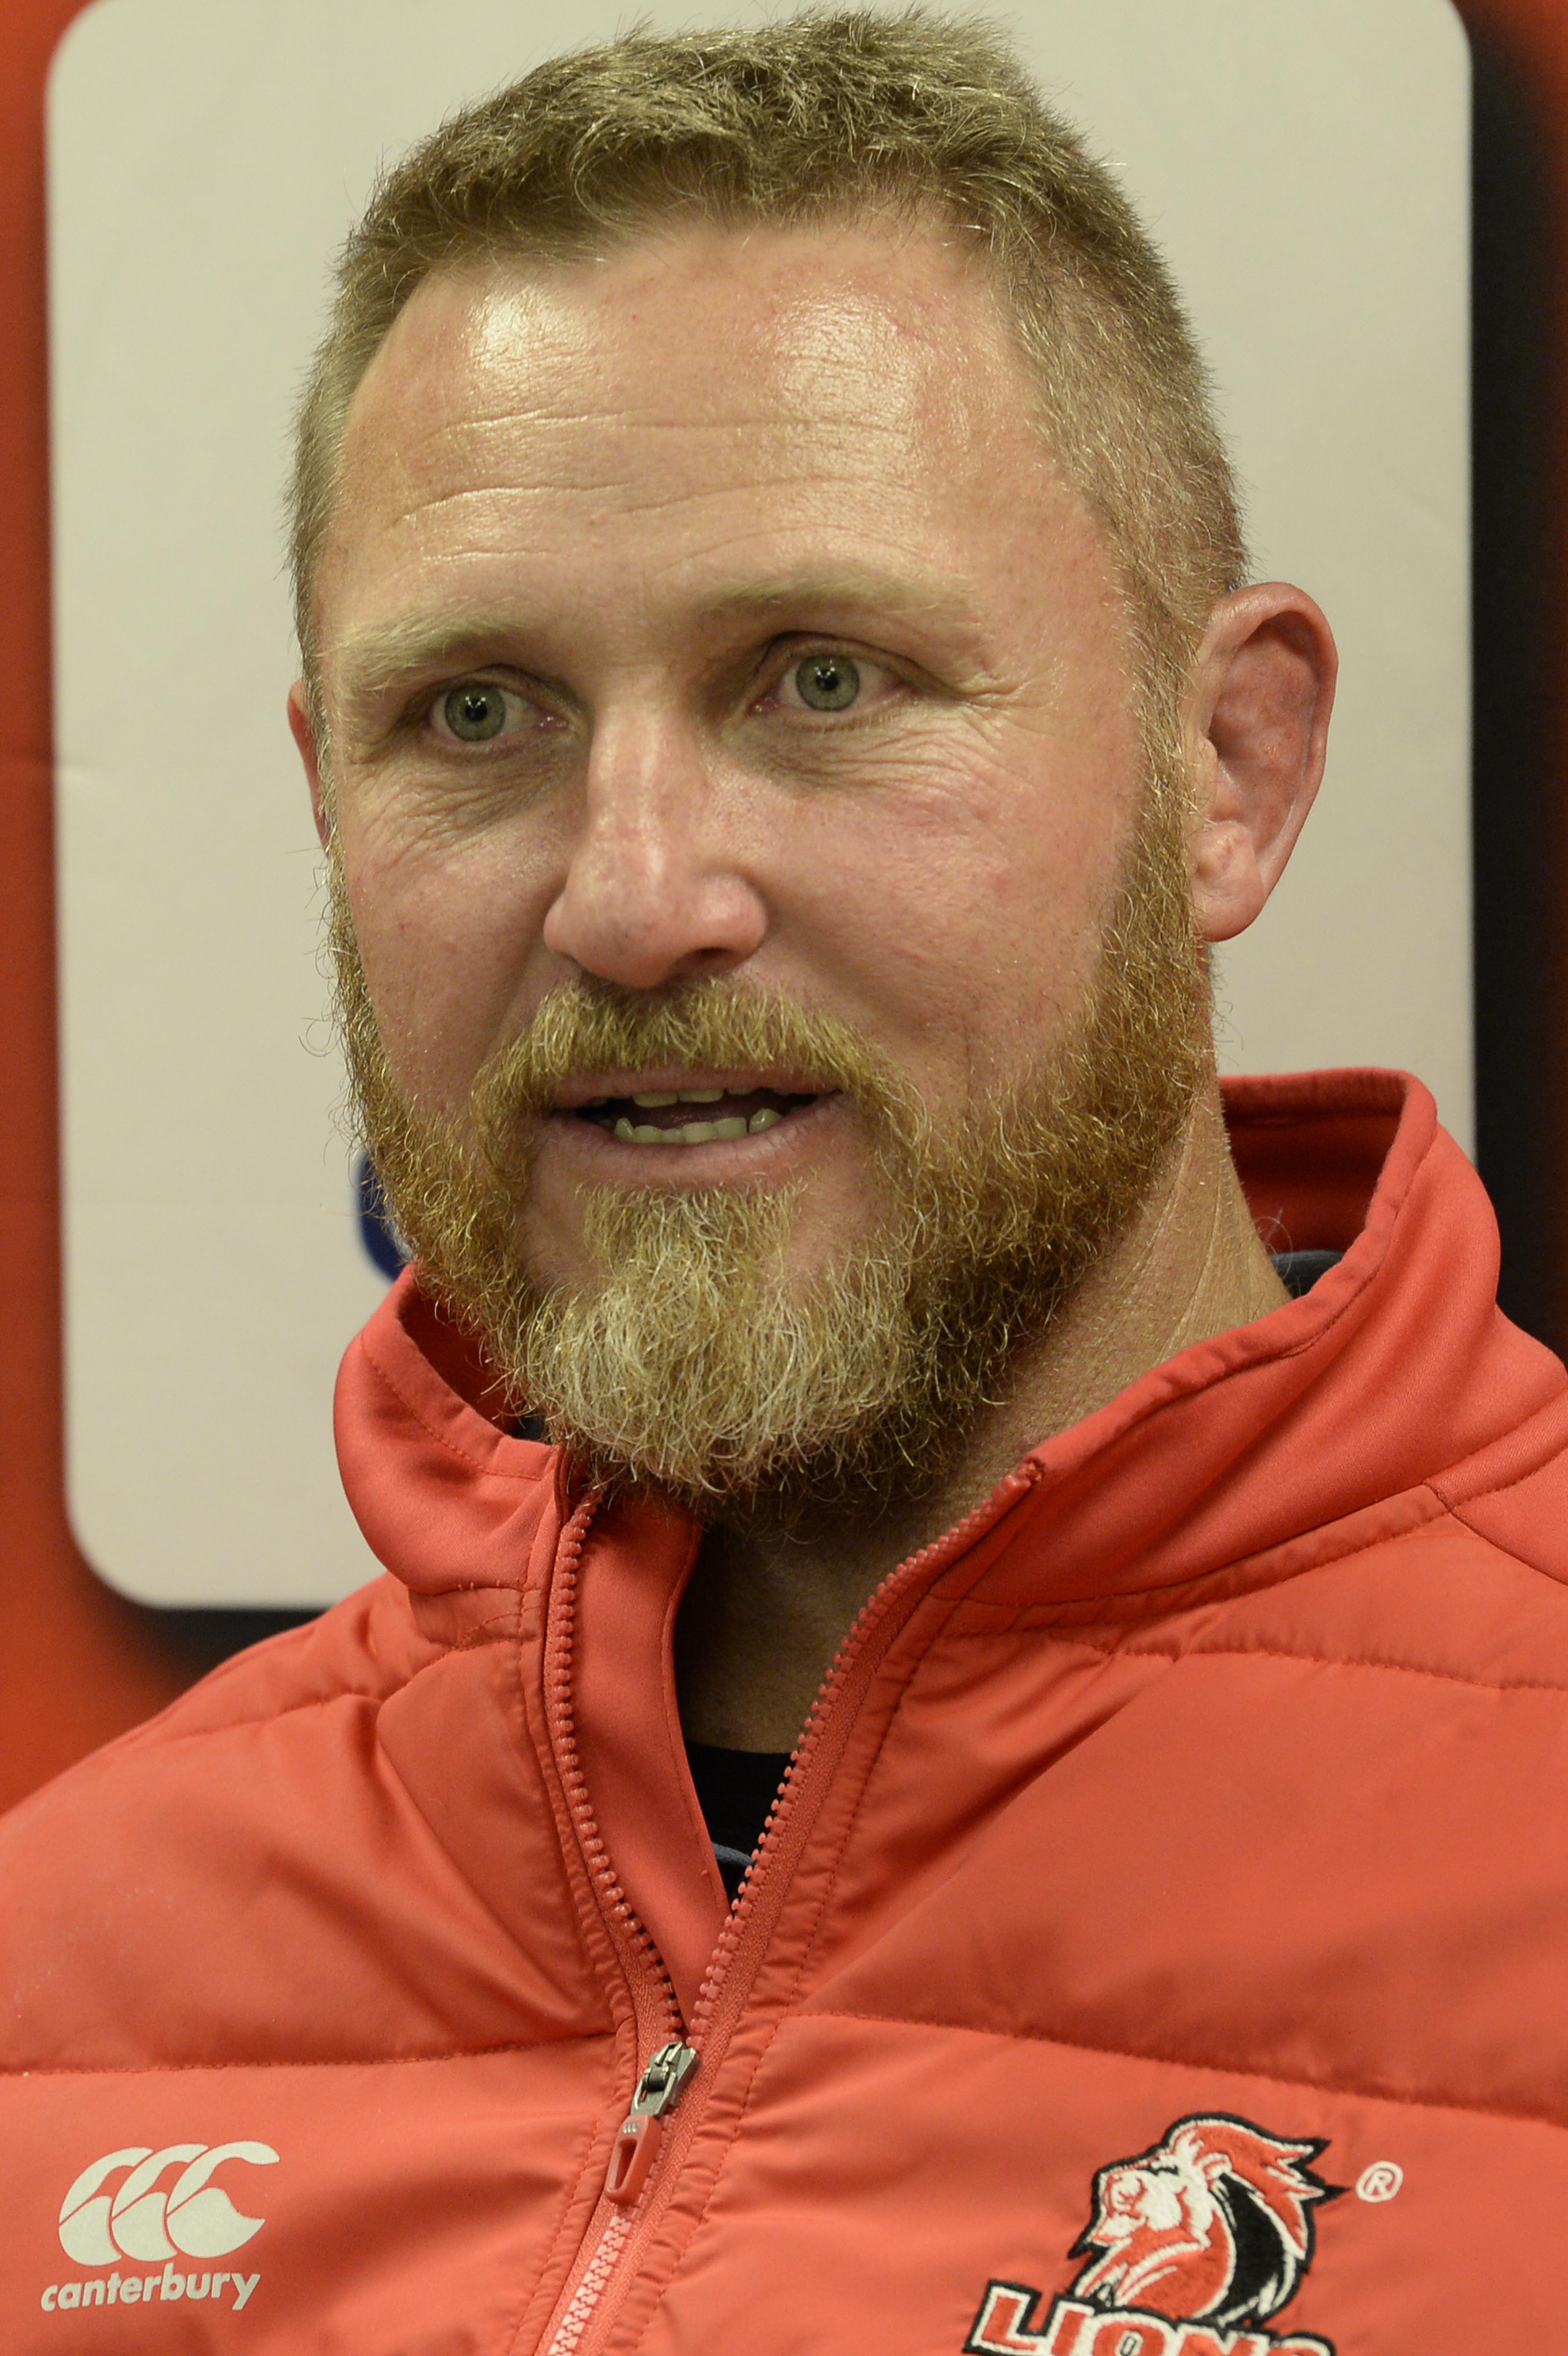 Ackermann, the bet and the beard